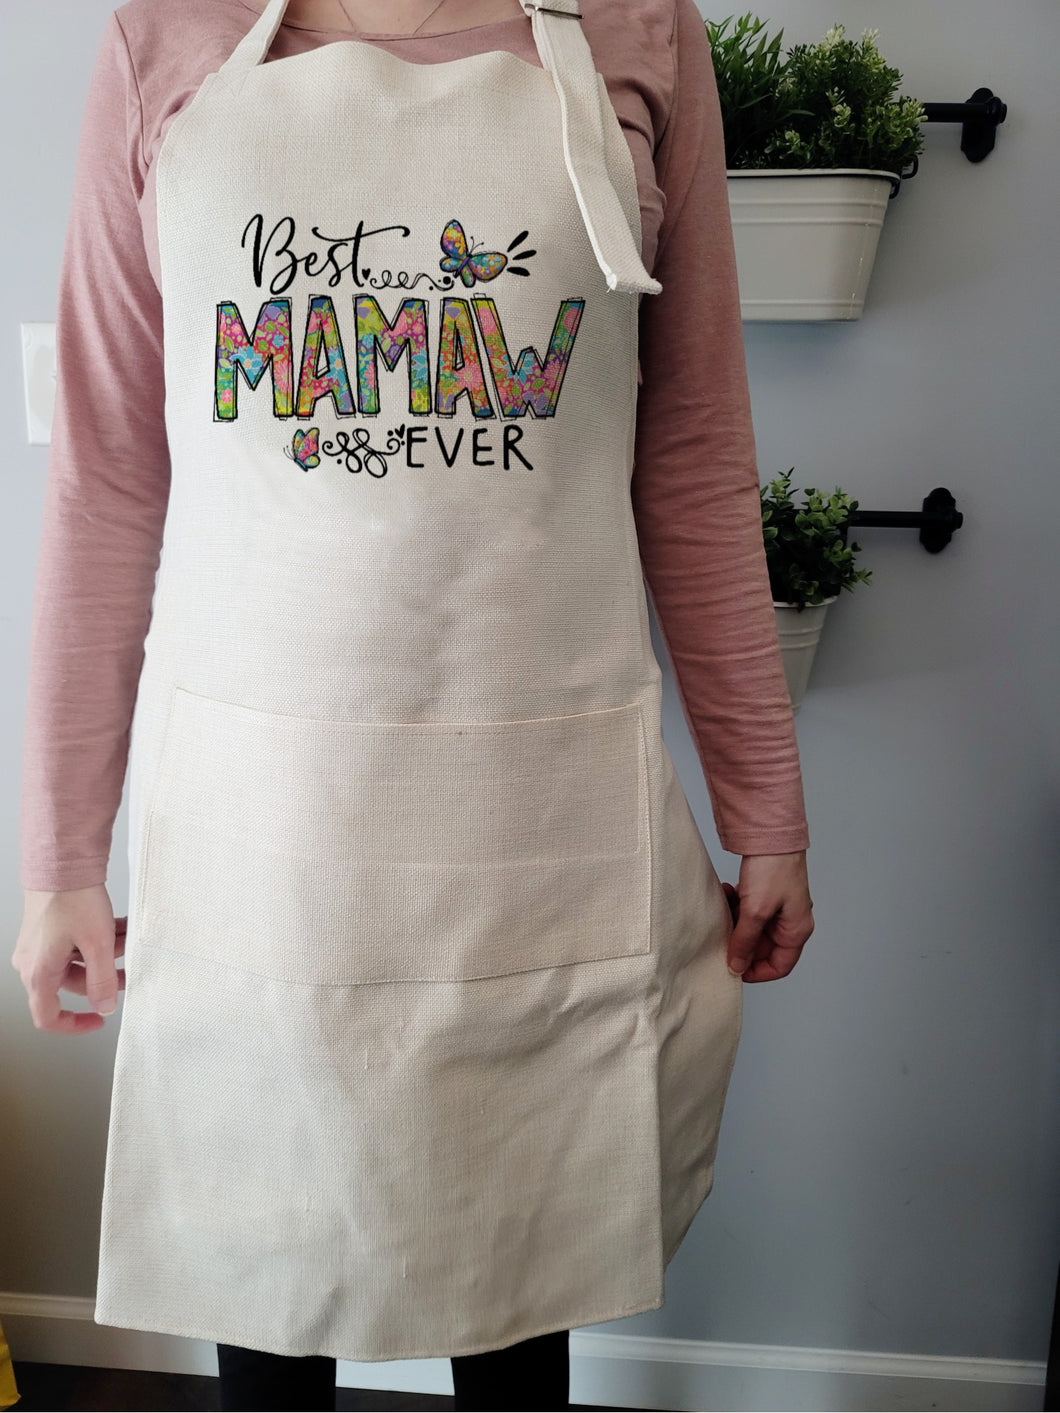 Best Mamaw Ever Apron